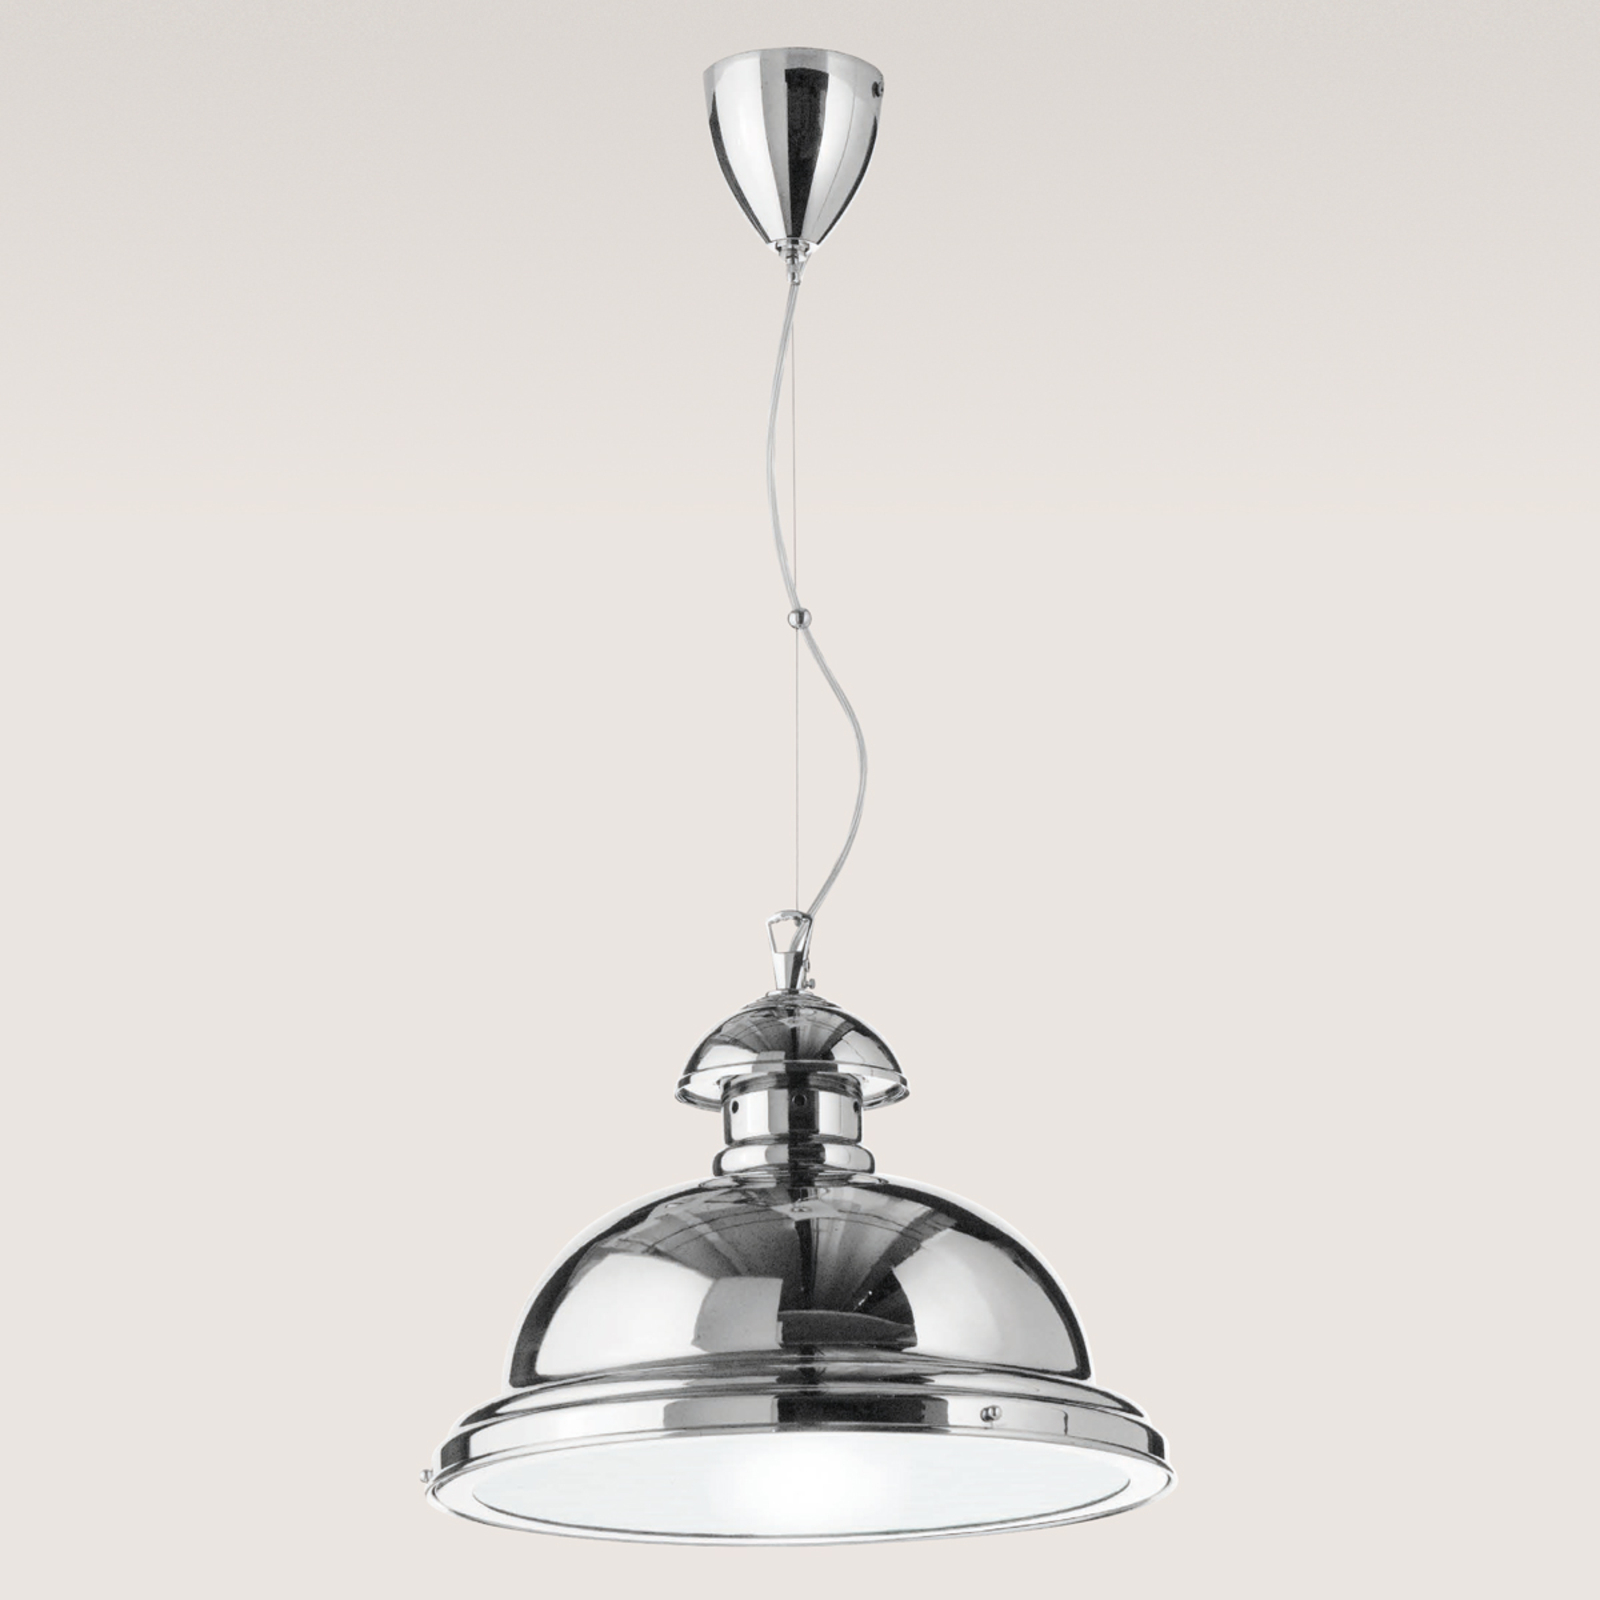 Glossy chrome-plated Scirocco hanging lamp